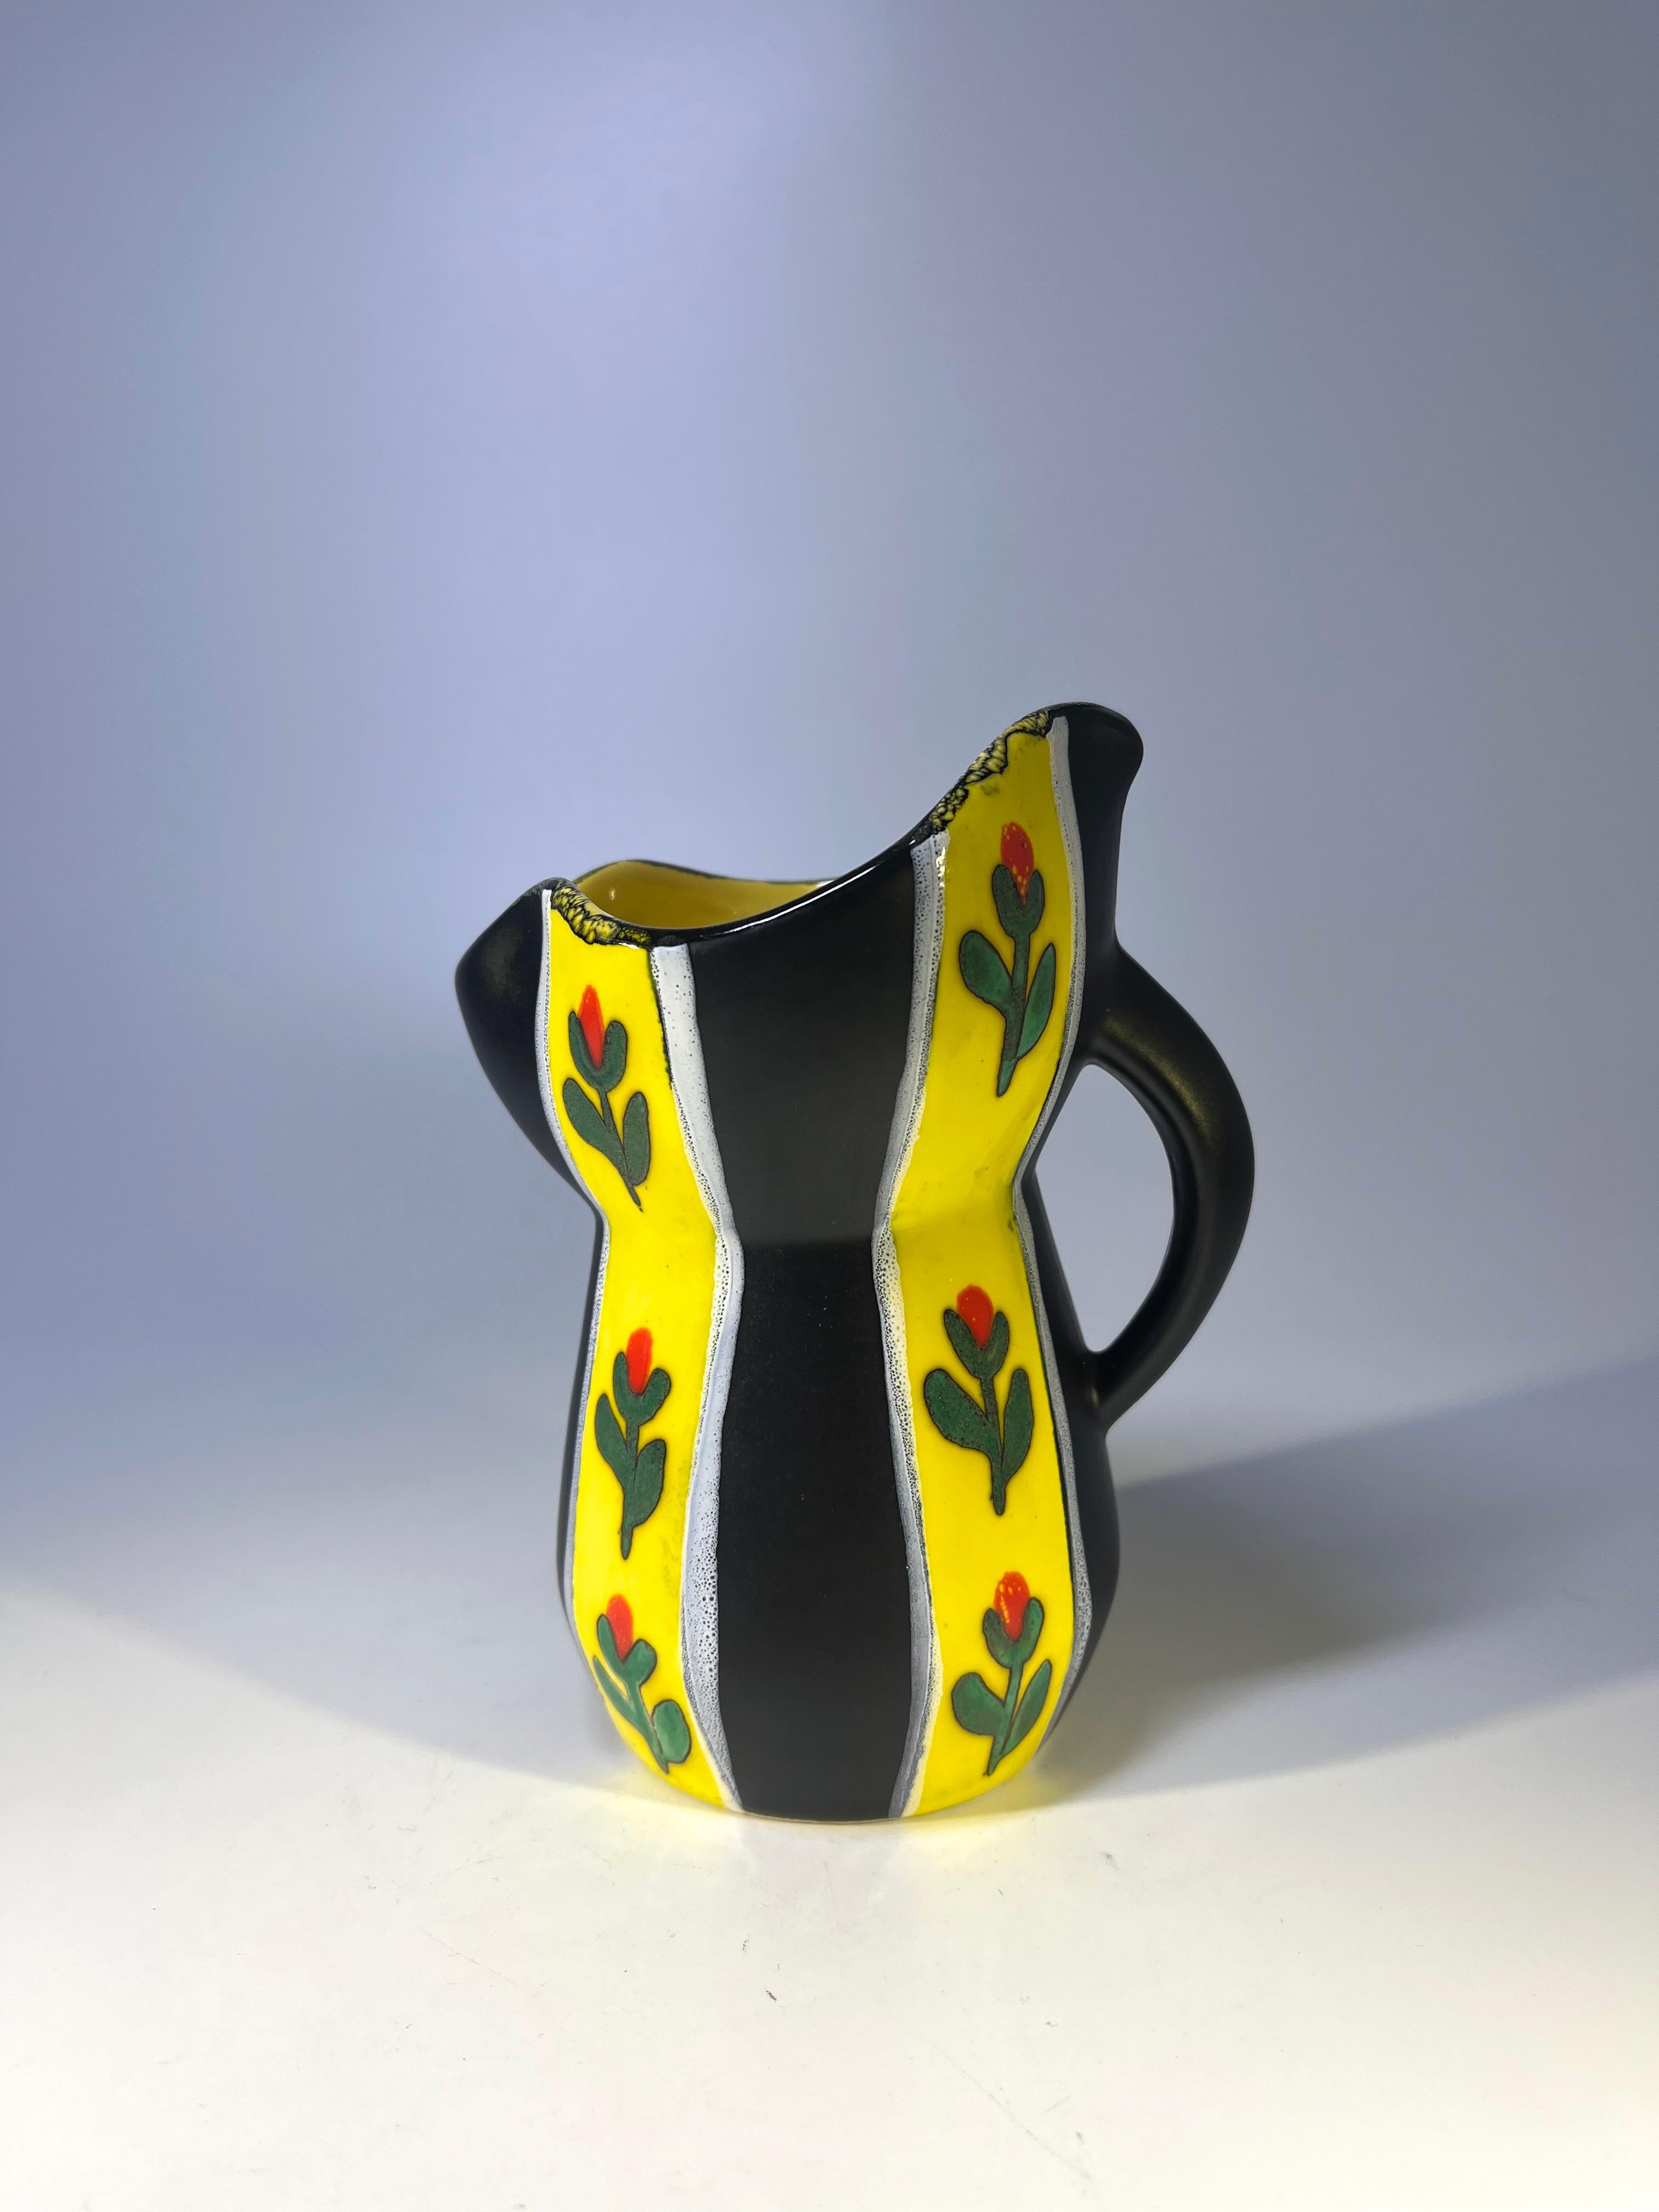 Striking yellow and black glazed pitcher, decorated with stylised flowers.
Bright yellow glaze to interior.
Fourmaintraux's unmistakable artistry makes this a great collectors piece.
Signed to base.
Circa 1950's.
Measures: height 5 inch, width